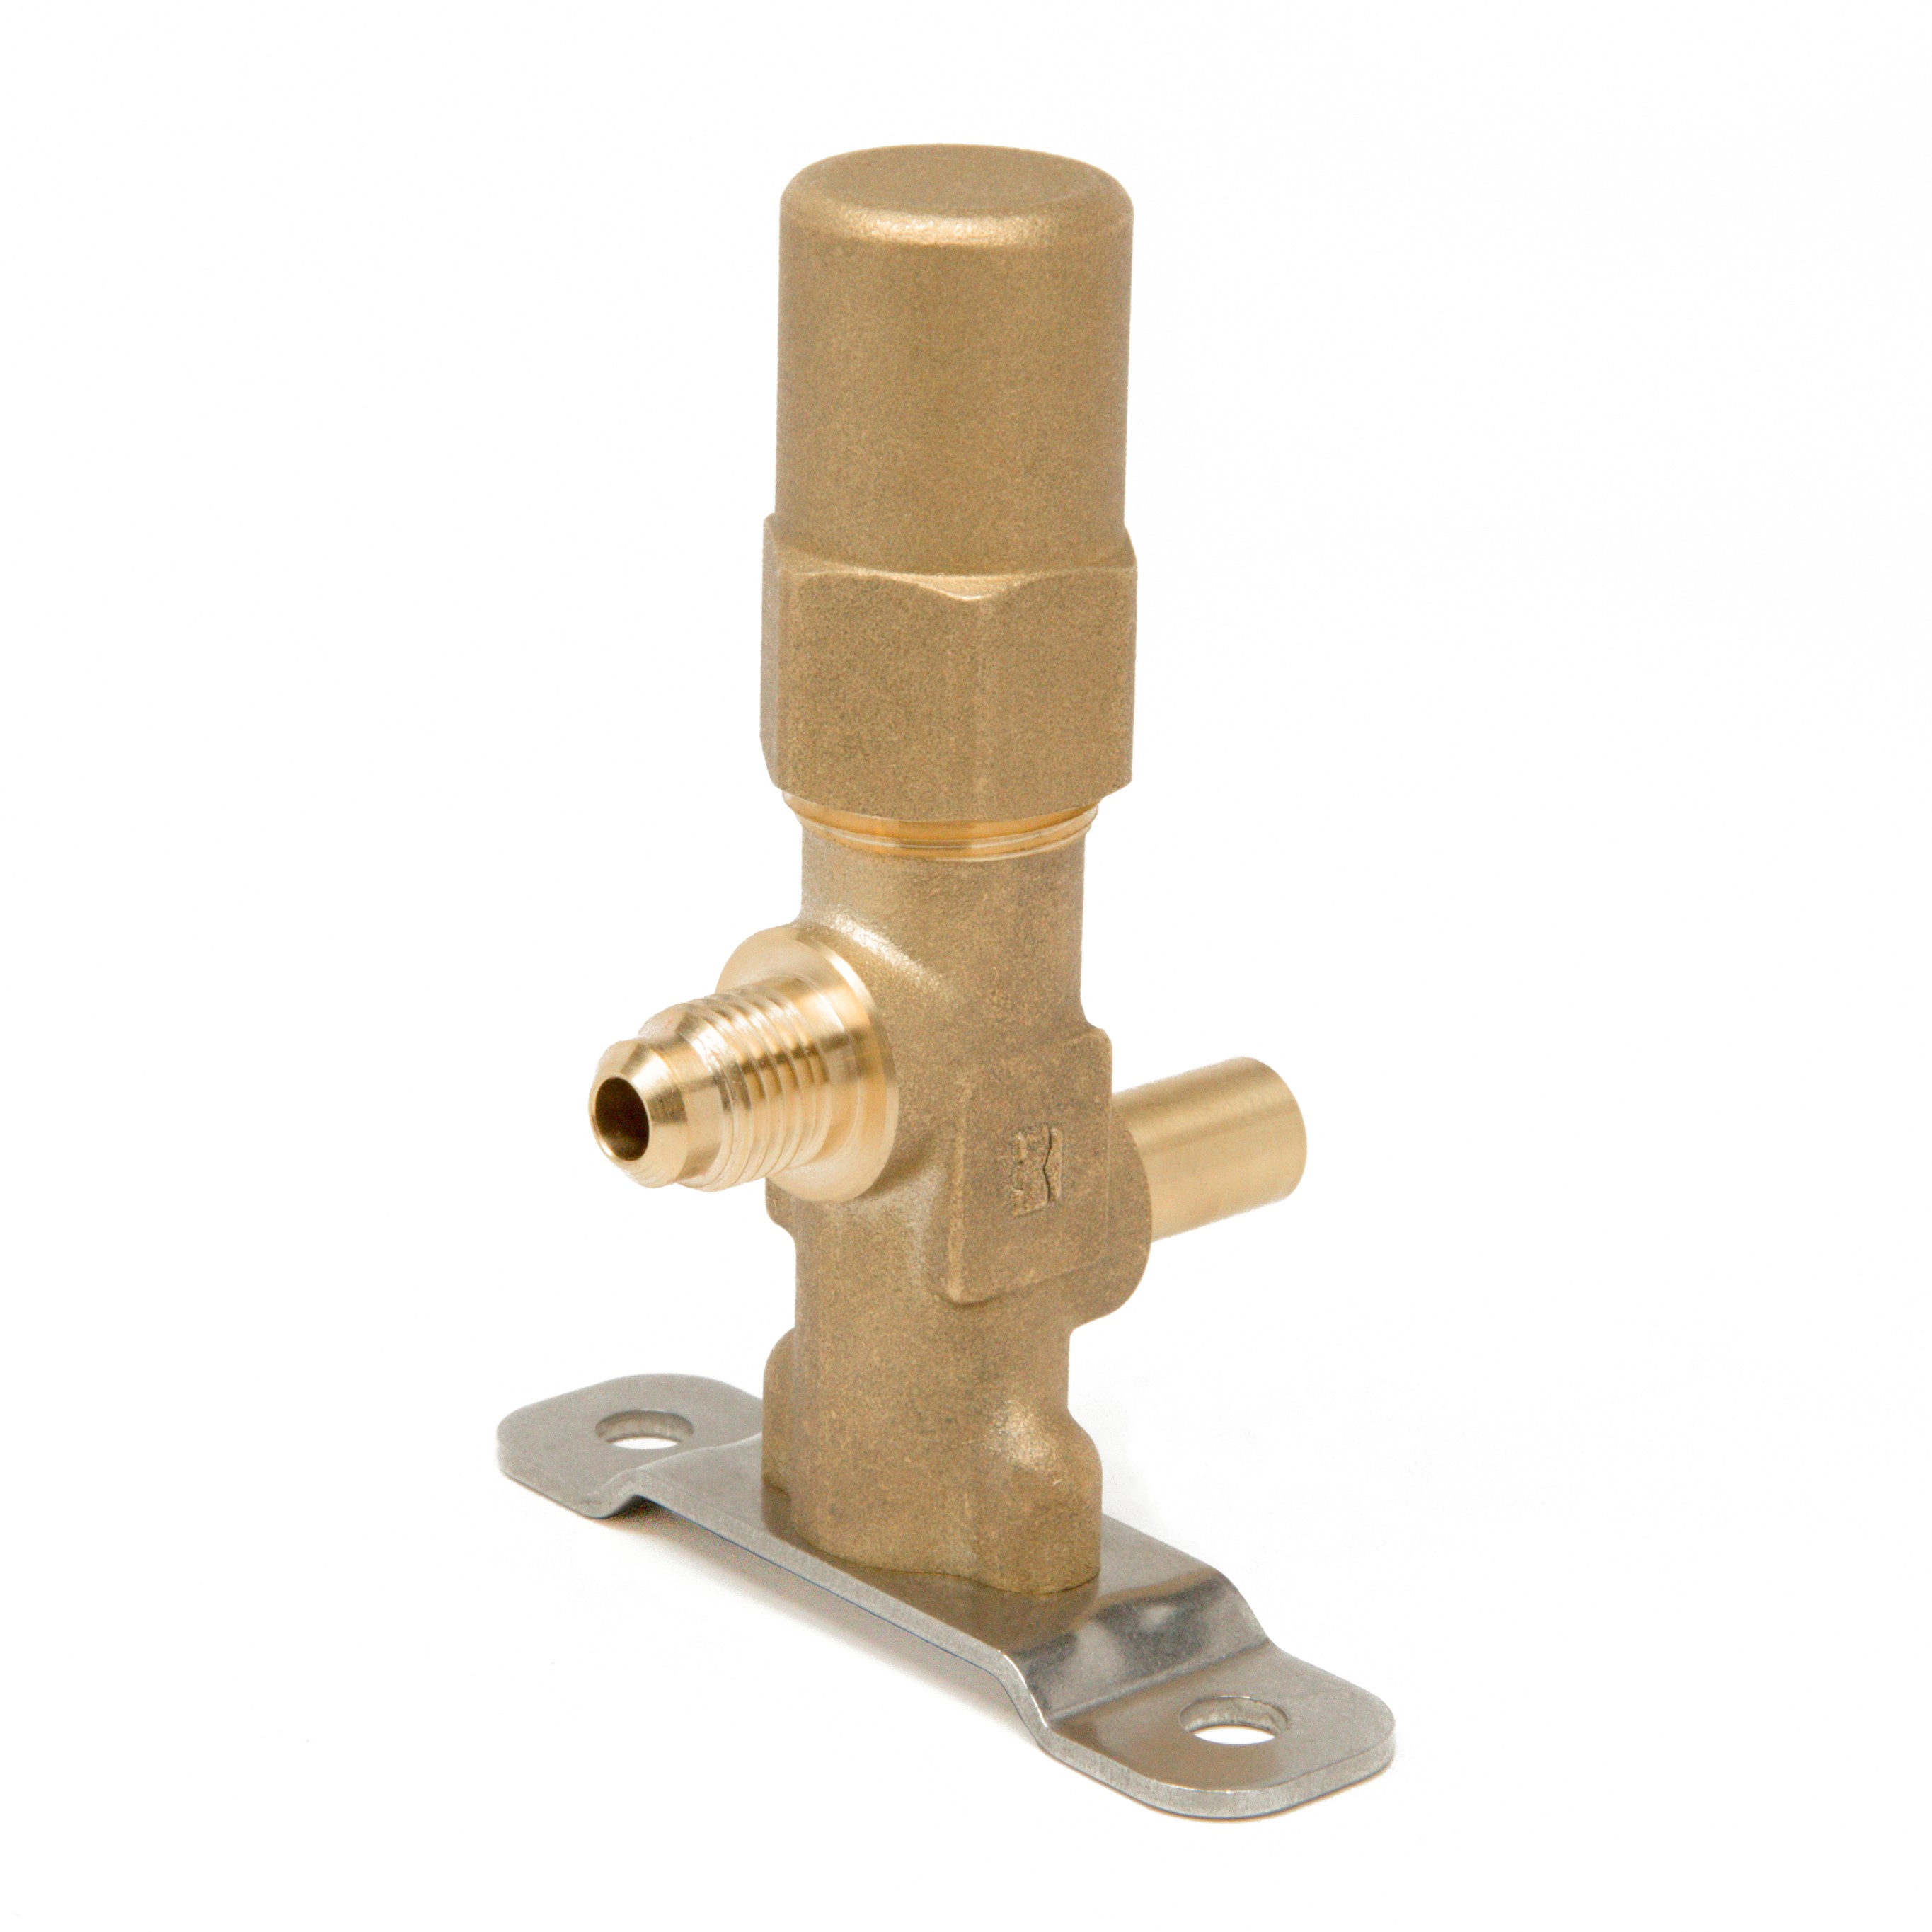 Details about   Superior Refrigeration 3 WAY Packless Line Valve 306-6S 3/8" O.D Sweat NOS 